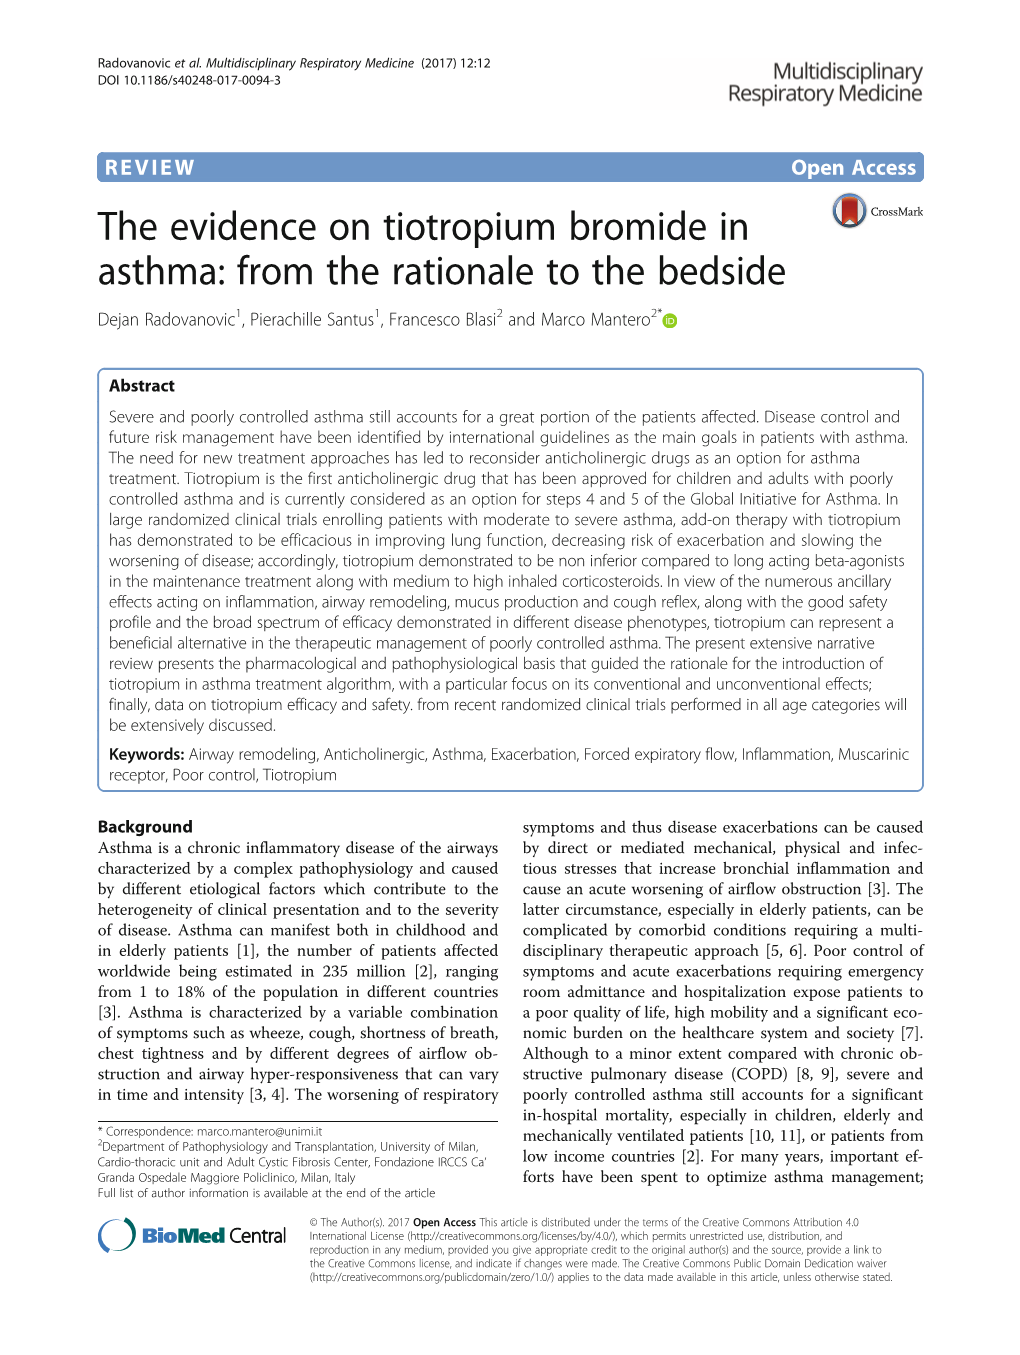 The Evidence on Tiotropium Bromide in Asthma: from the Rationale to the Bedside Dejan Radovanovic1, Pierachille Santus1, Francesco Blasi2 and Marco Mantero2*